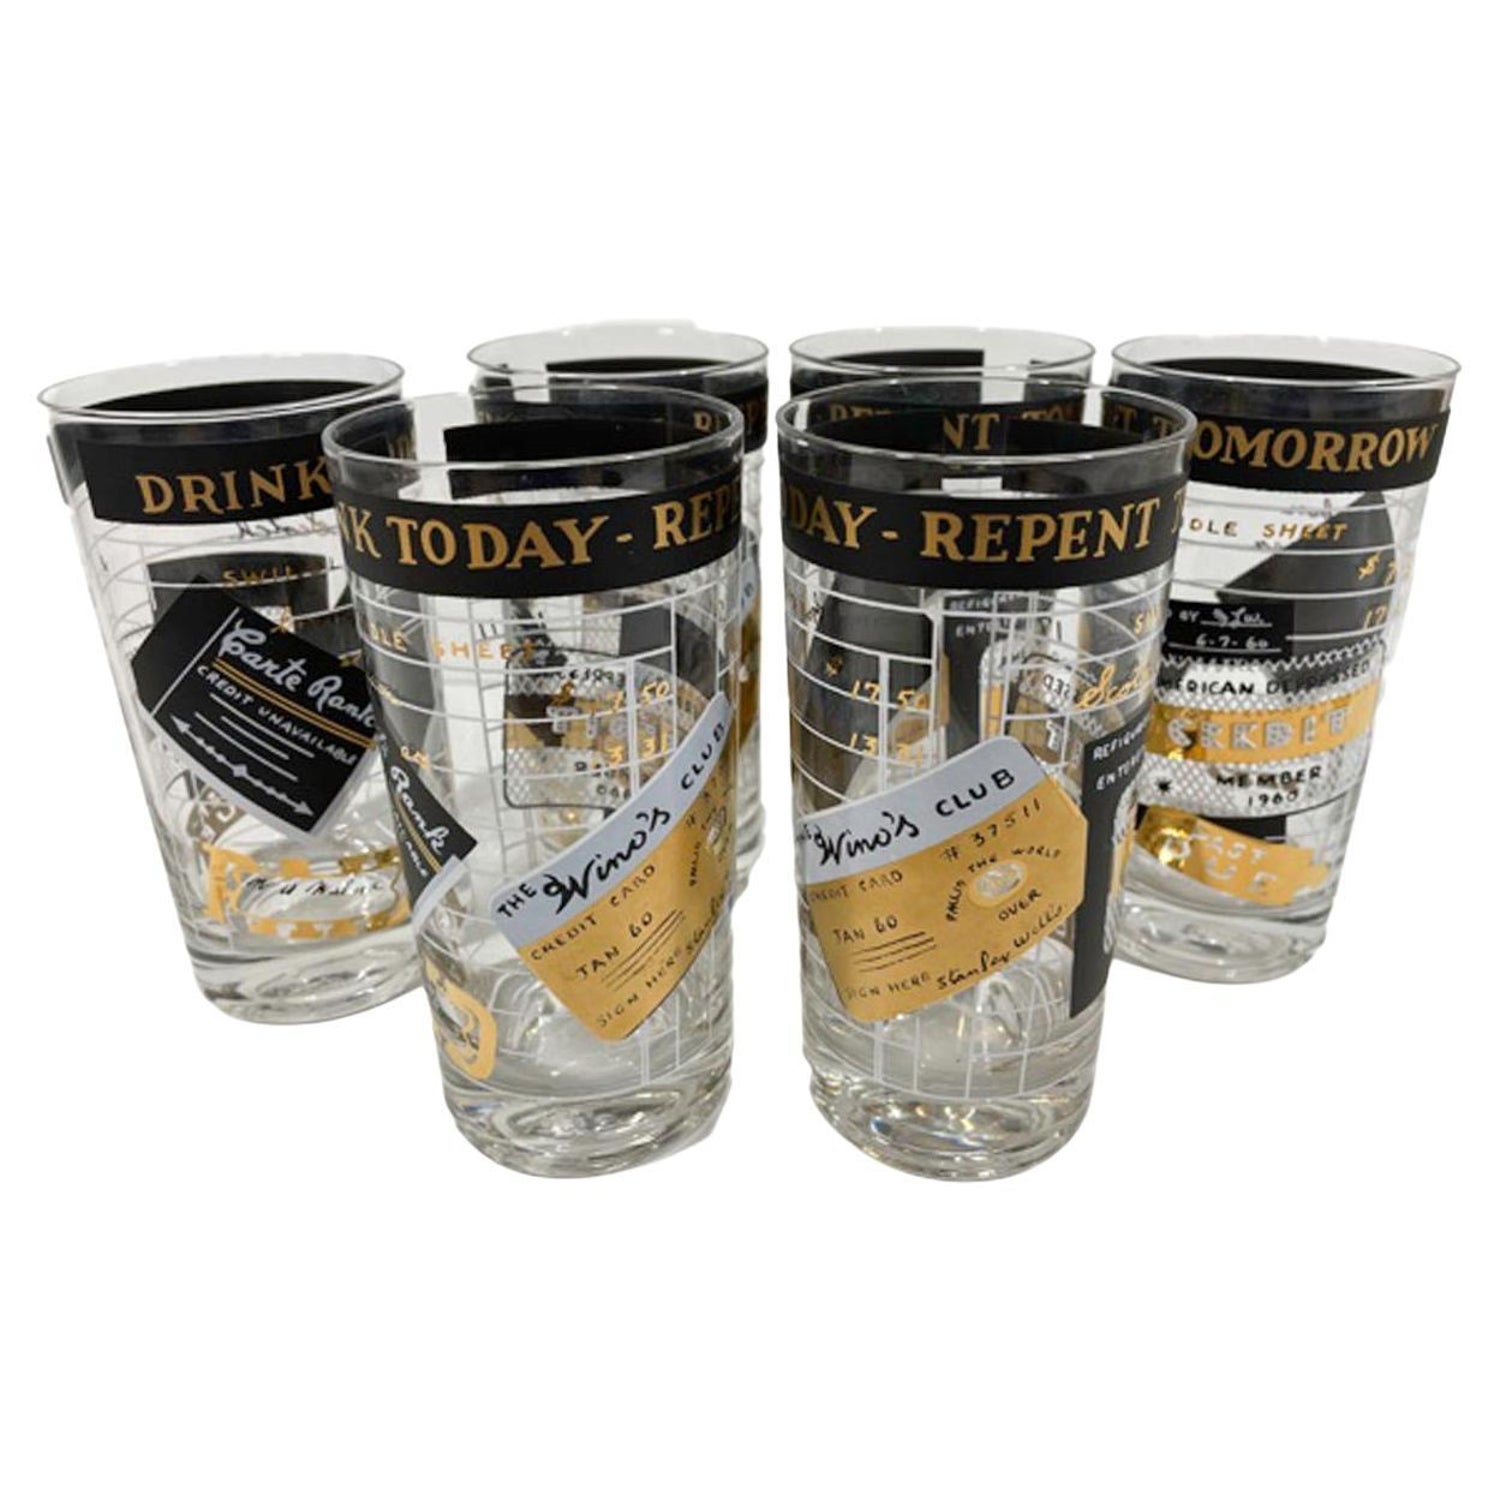 https://a.1stdibscdn.com/set-of-6-credit-card-themed-highball-glasses-drink-today-repent-tomorrow-for-sale/f_13752/f_257401821634396267010/f_25740182_1634396267442_bg_processed.jpg?width=1500